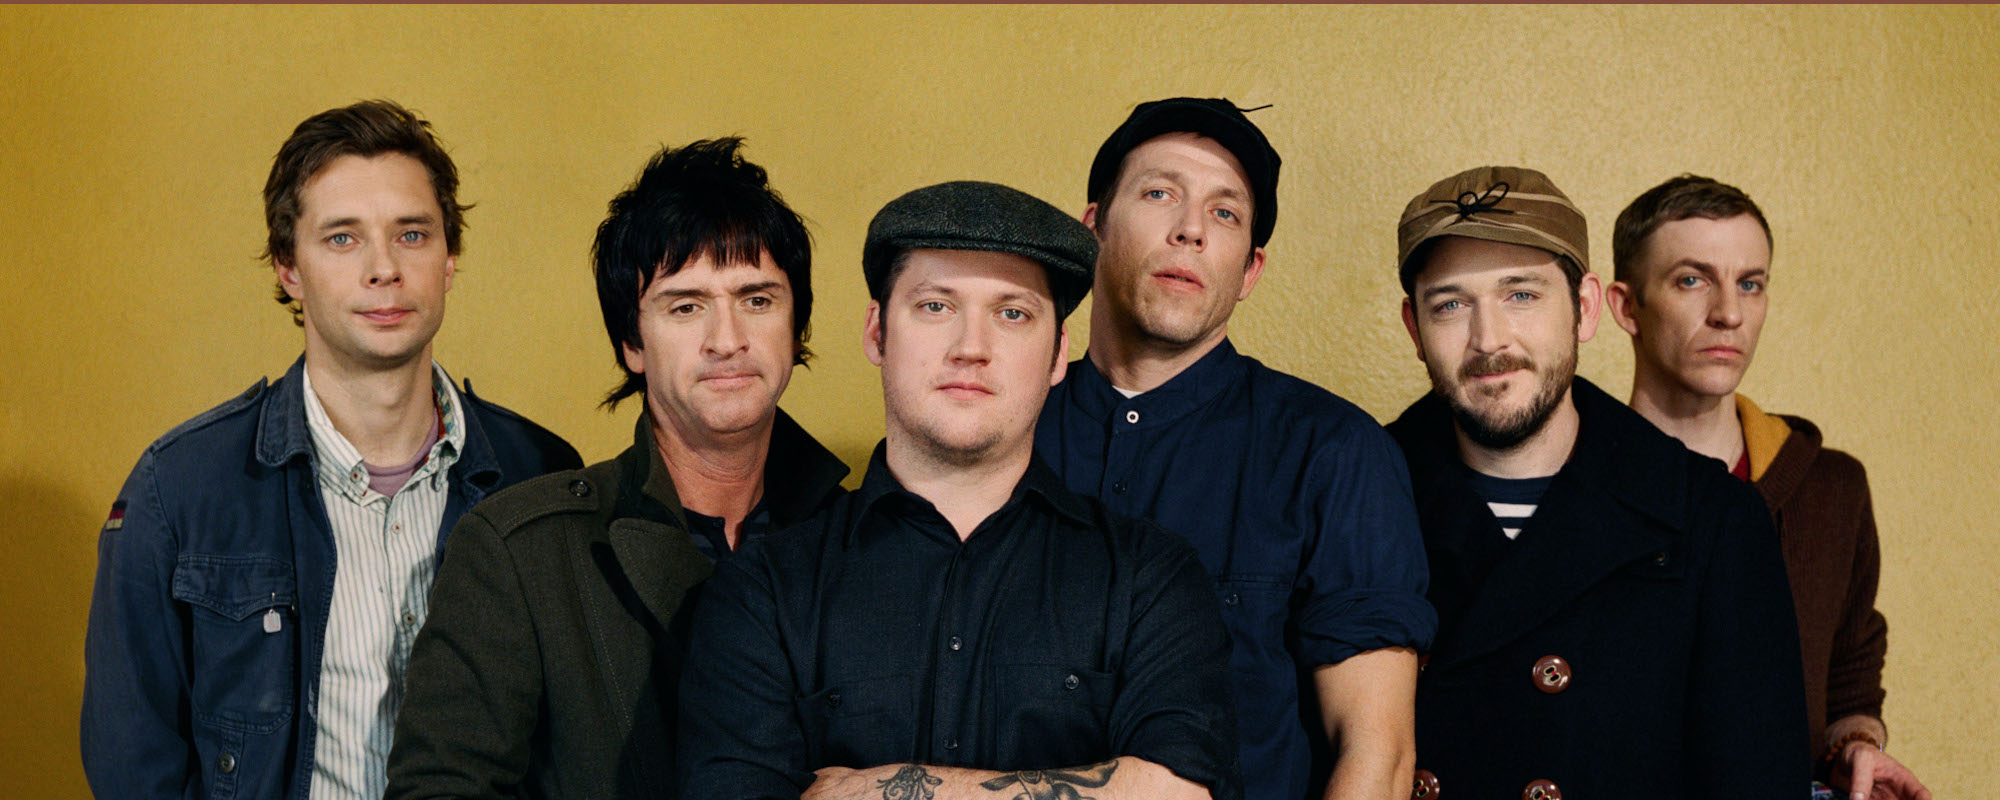 Behind the Band Name: Modest Mouse